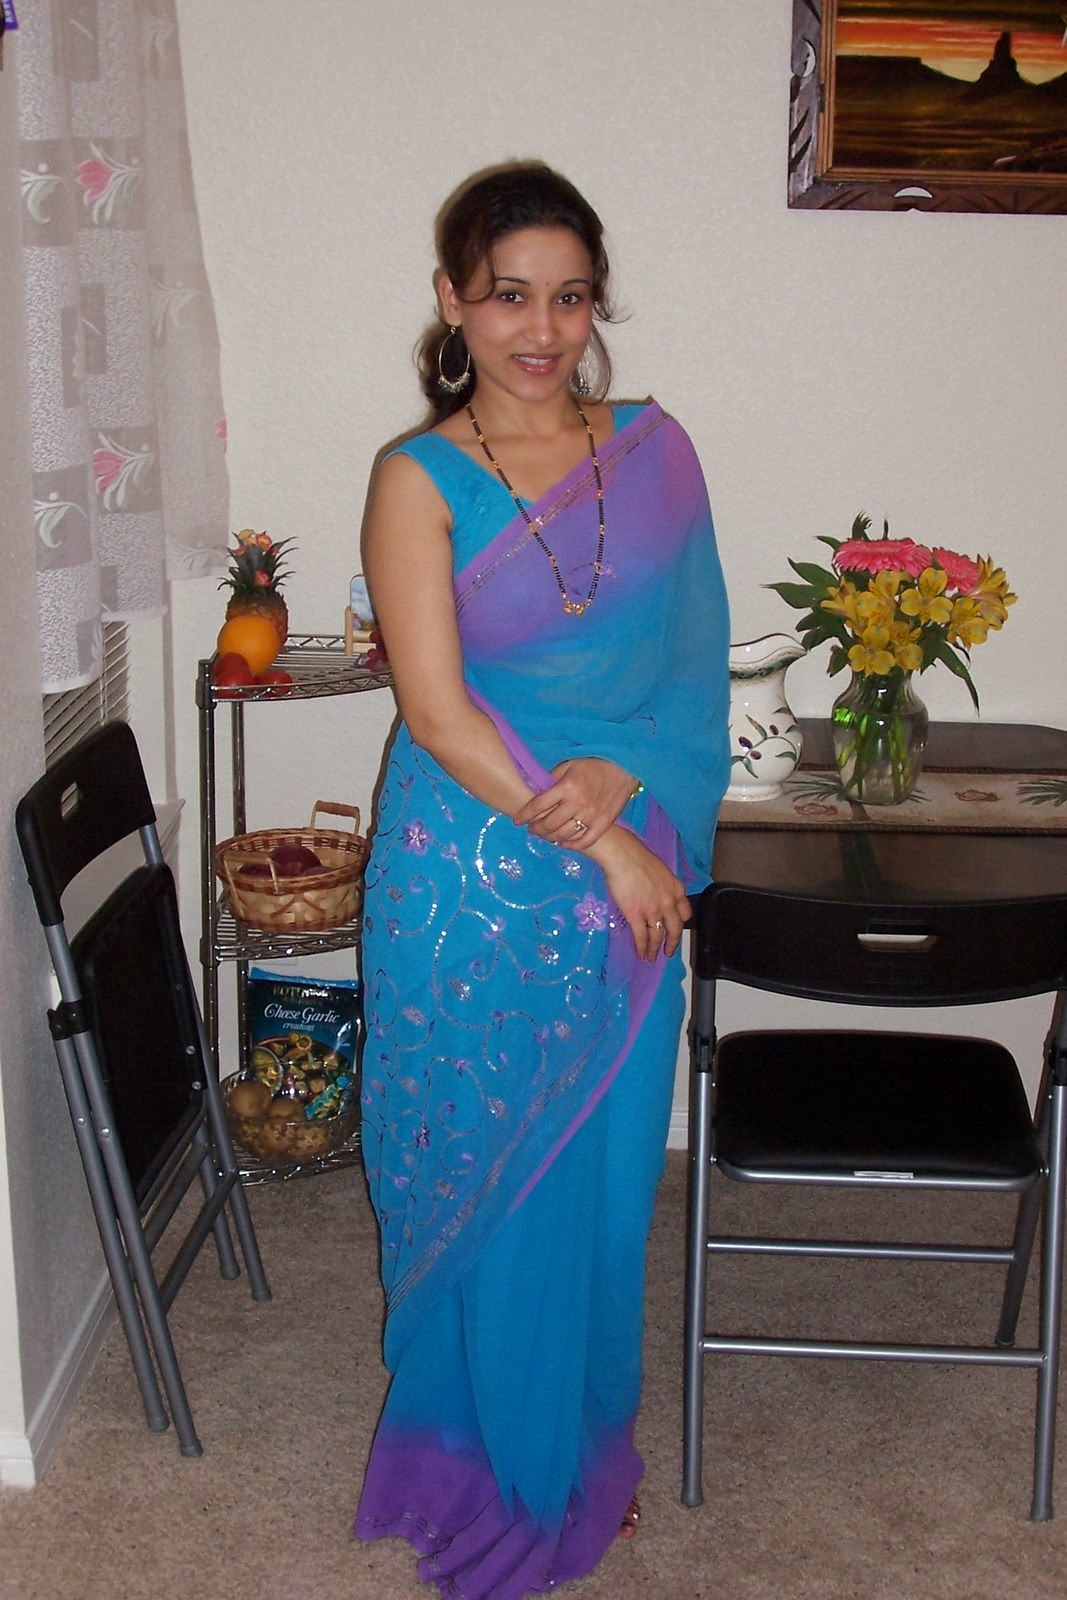 31 Indian Housewife S And Girls In Saree Pictures Gallery Free Nude ... picture